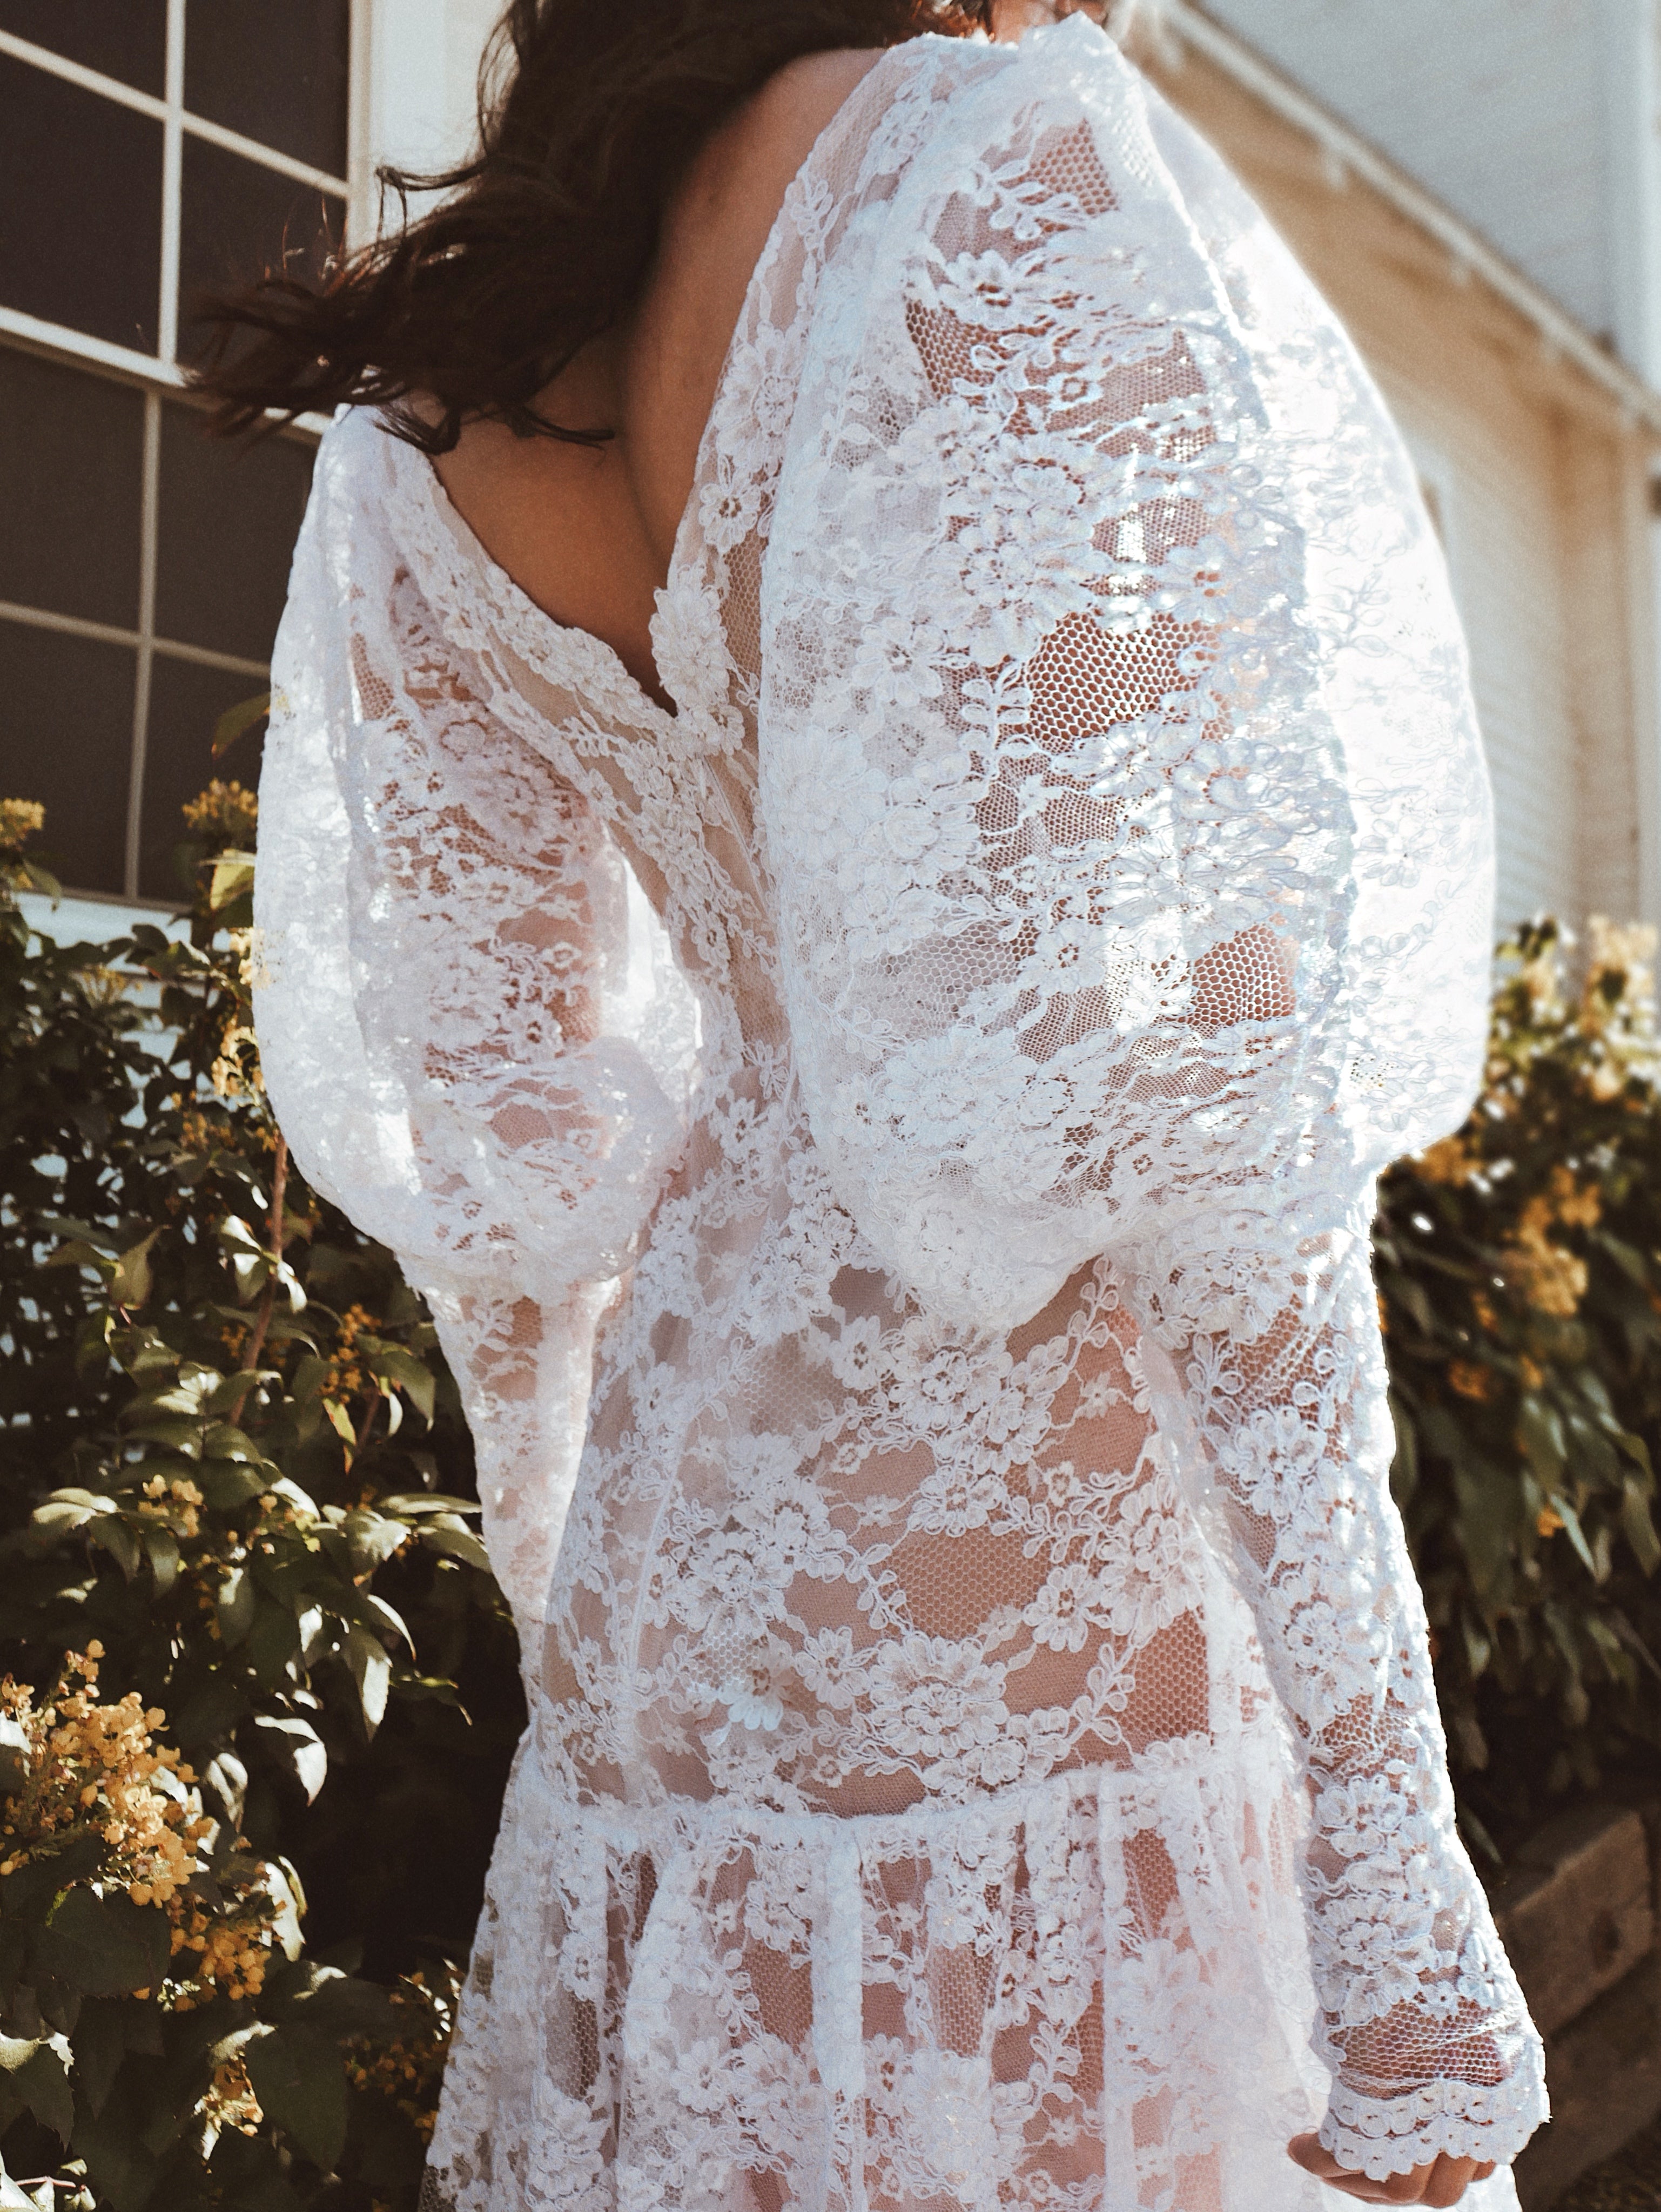 Dramatic lace gigot sleeves on the Lauren Elaine "Meadow" wedding dress.